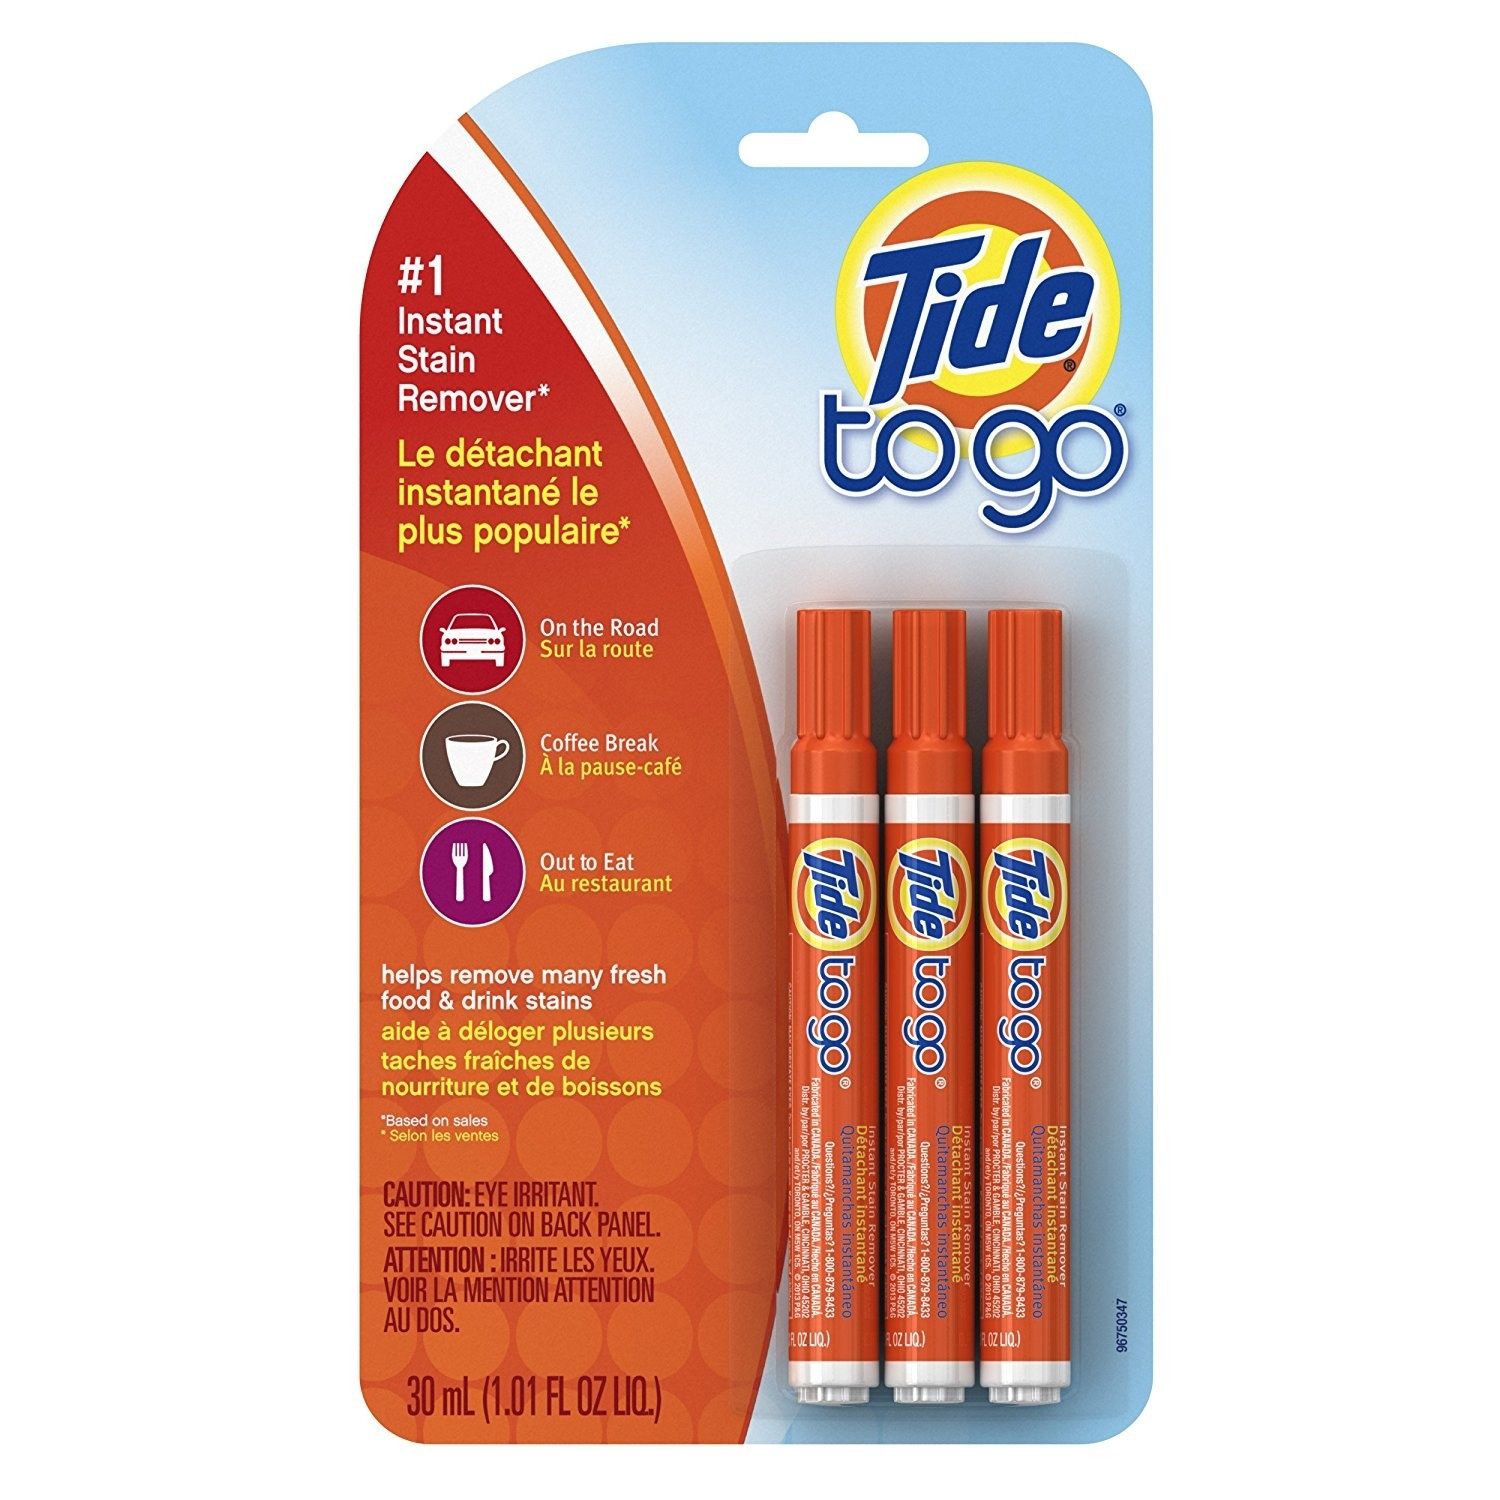 Hell yeah, Tide is making vapes now too.